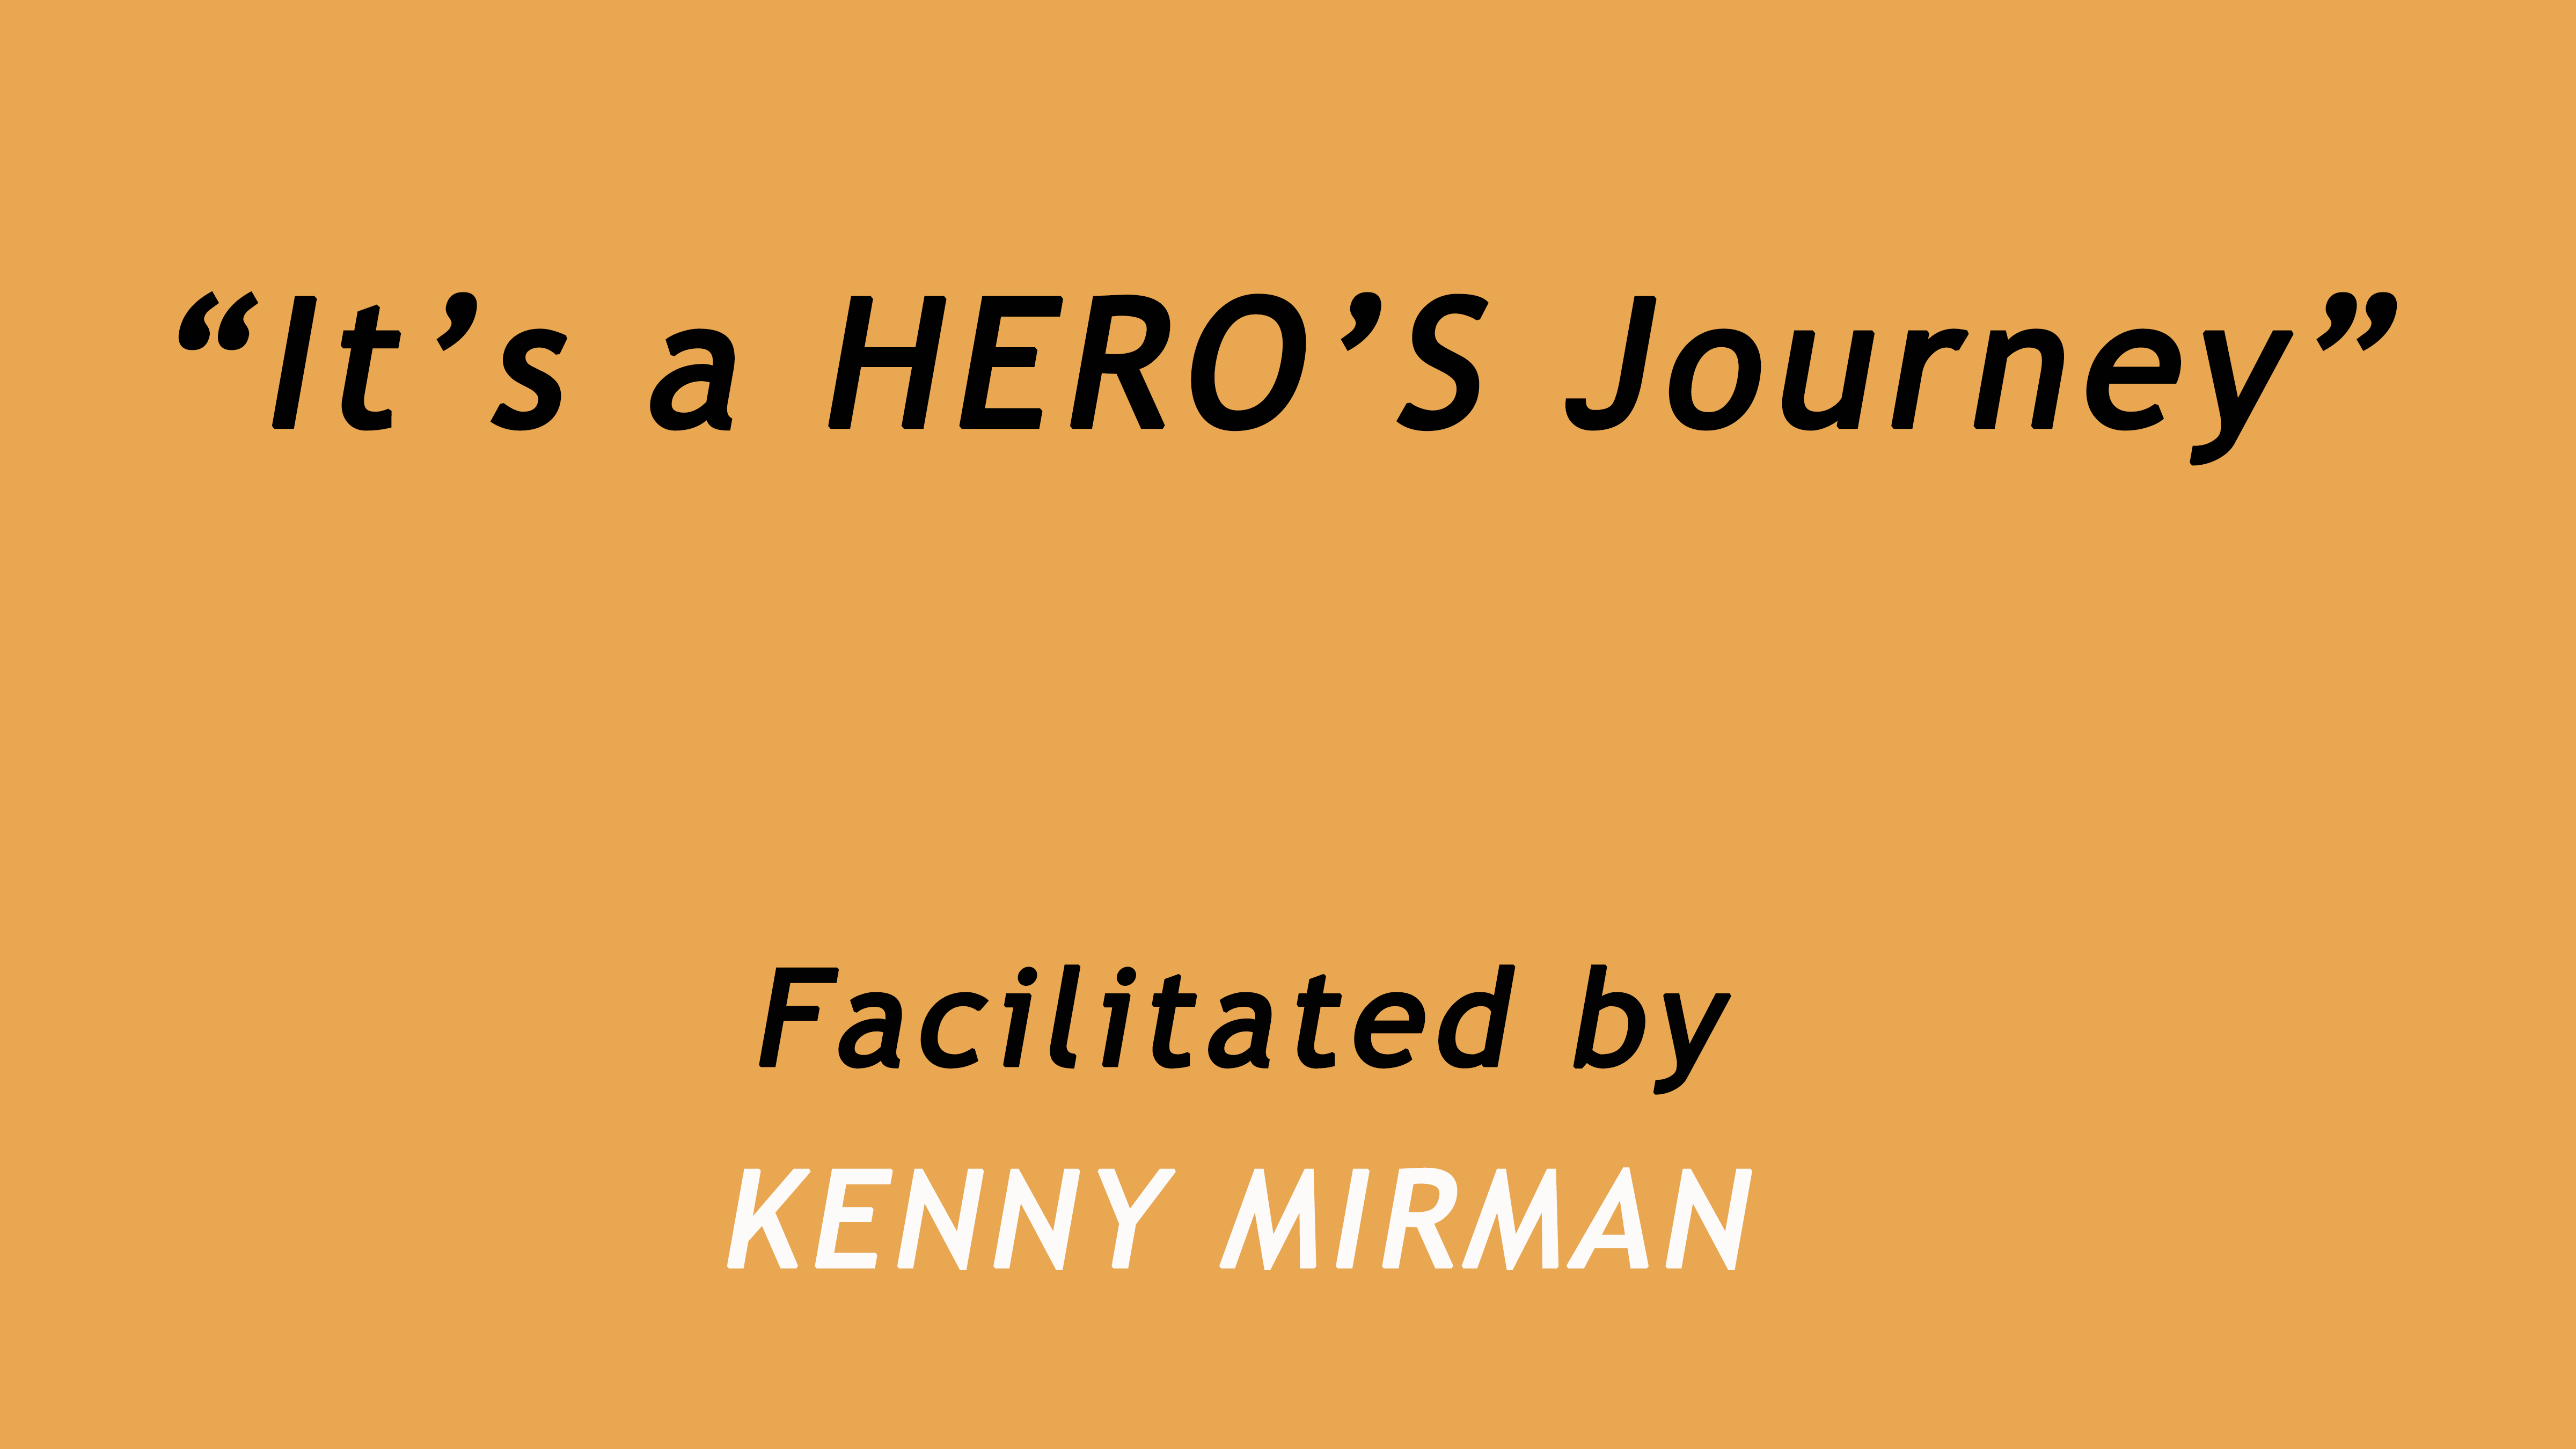 It's A Hero's Journey. Facilitated by Kenny Mirman